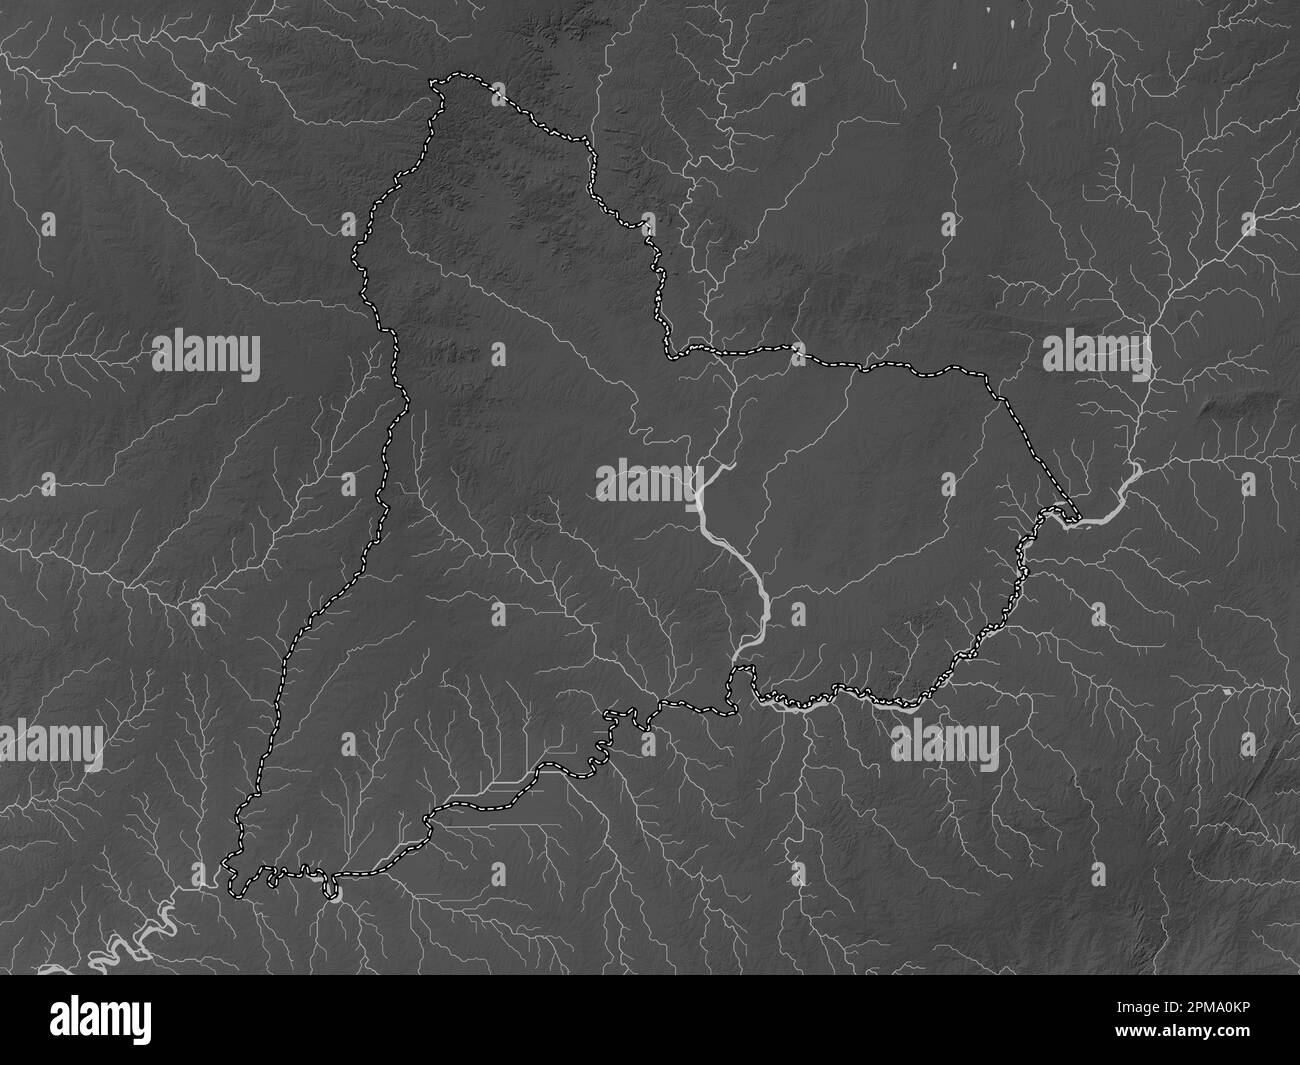 Tacuarembo, department of Uruguay. Grayscale elevation map with lakes and rivers Stock Photo